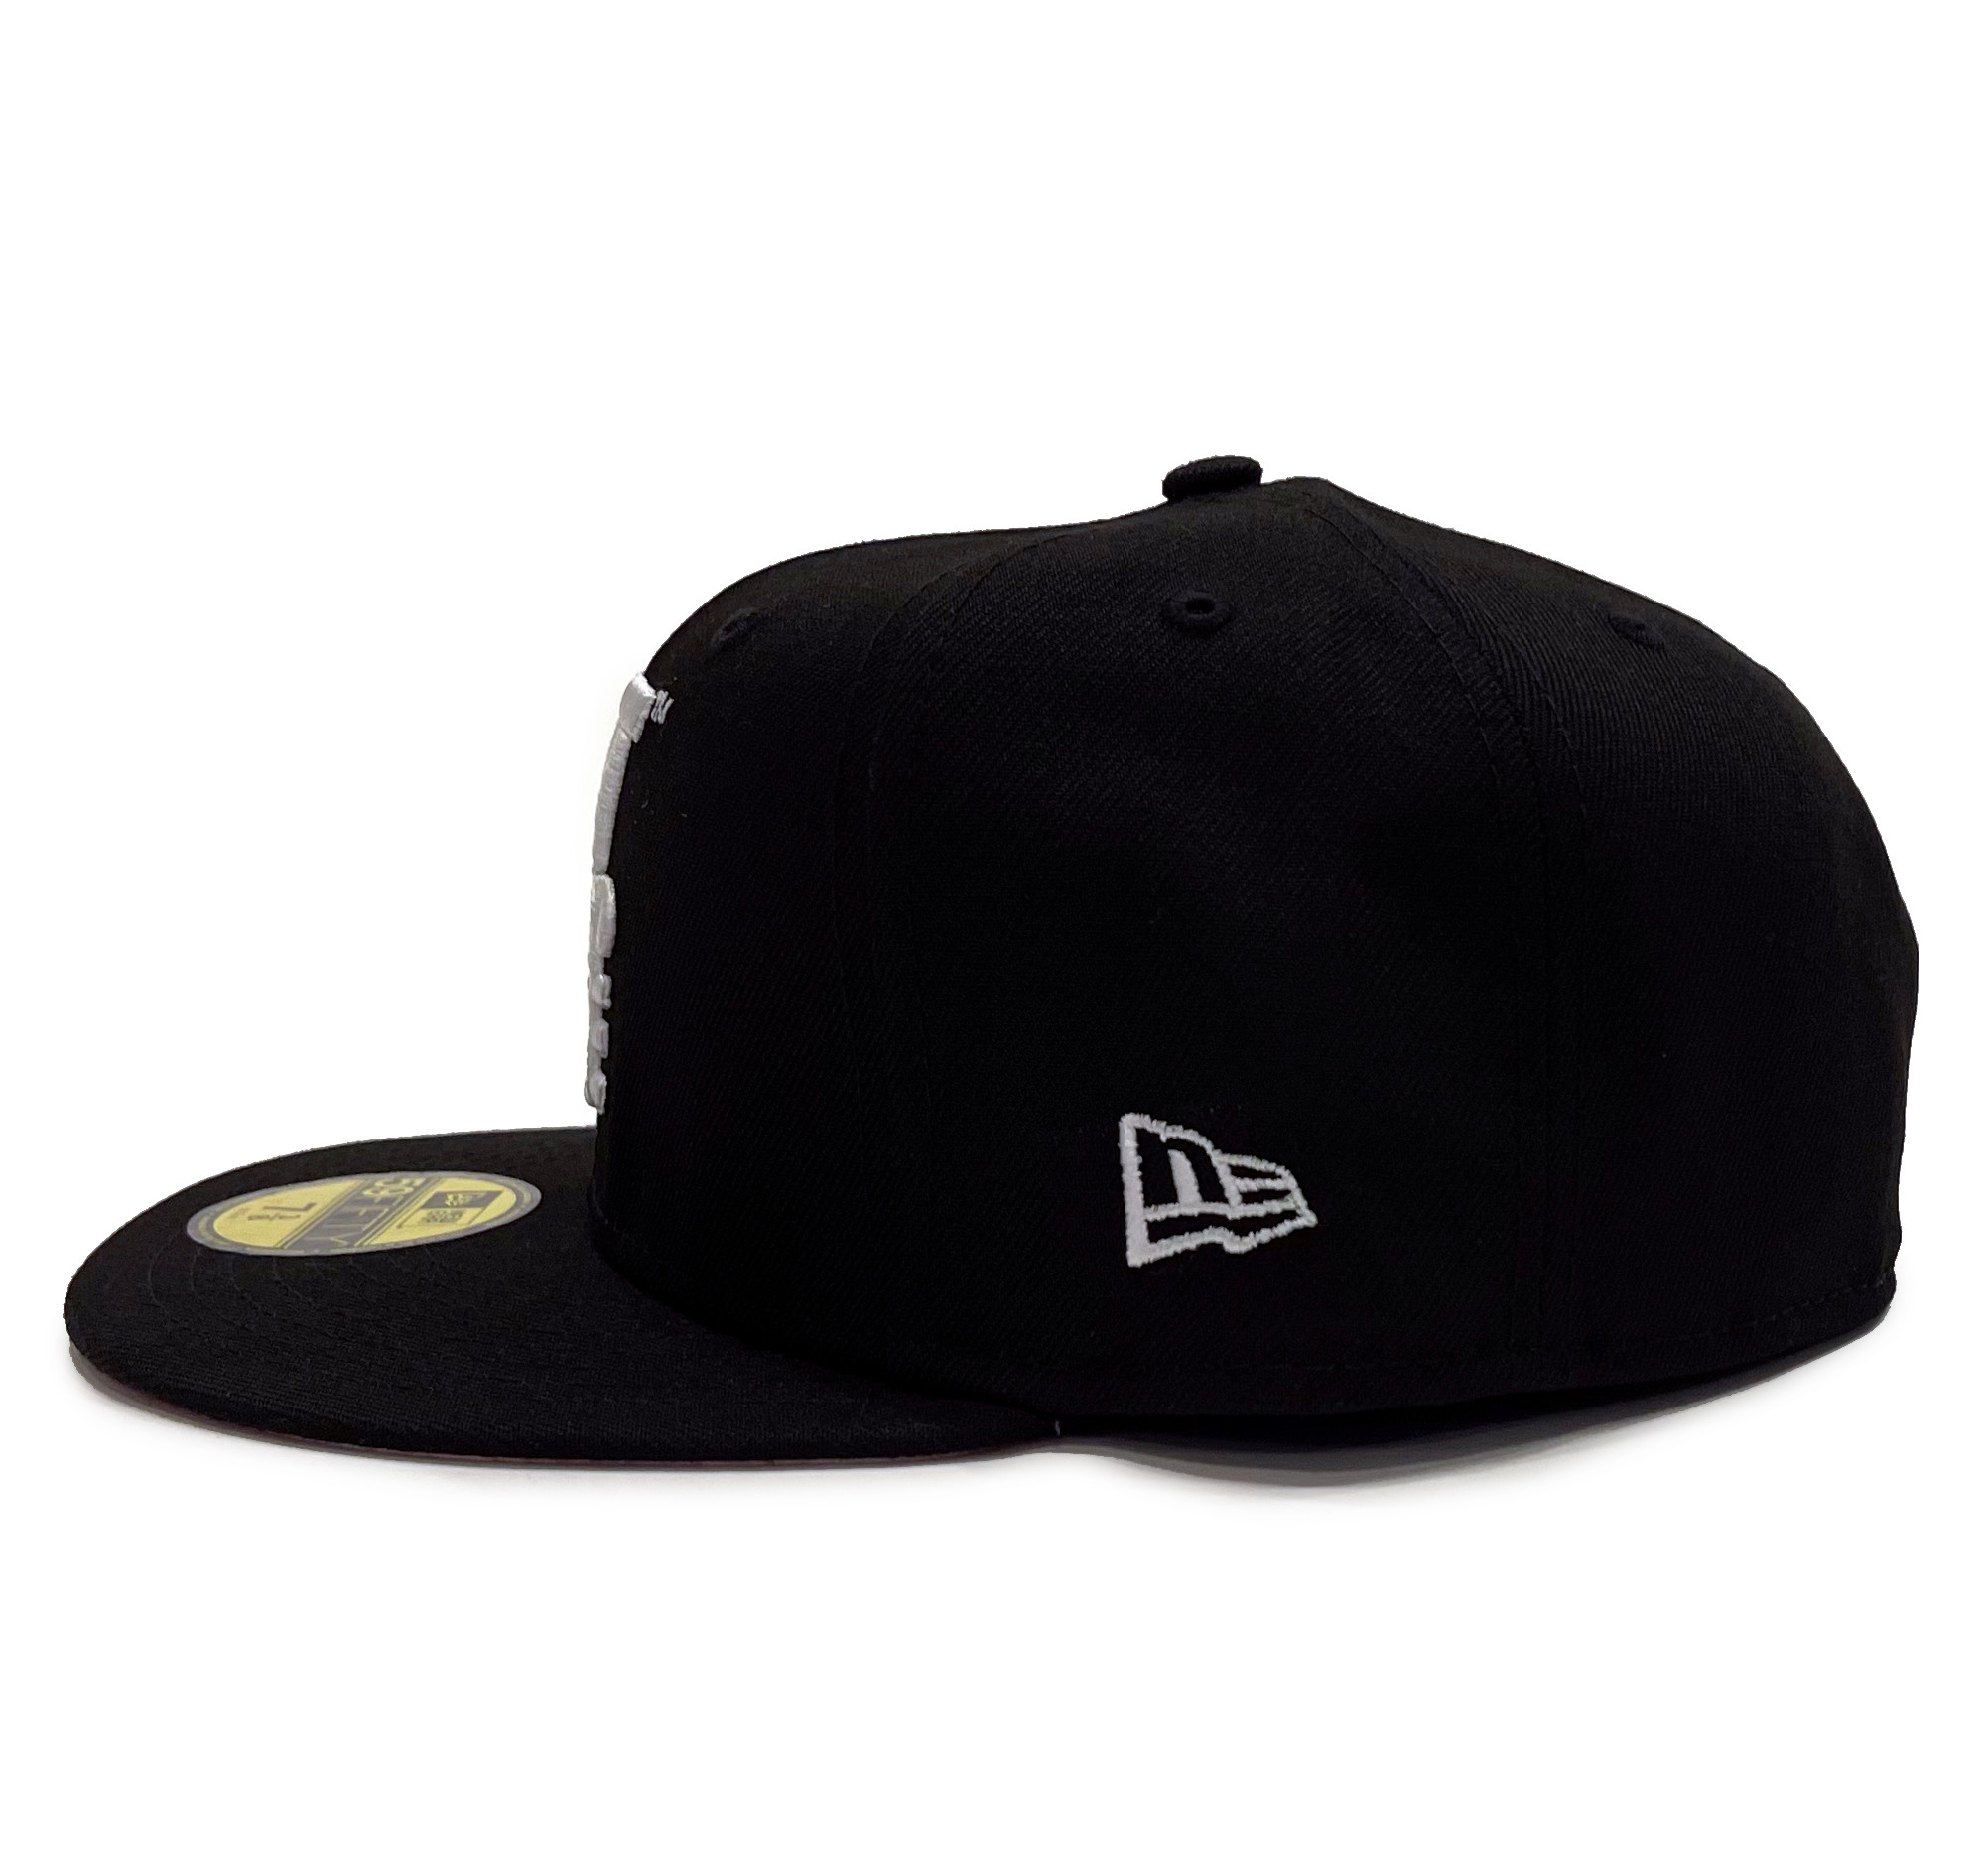 New Era 59FIFTY Logo Fitted Hat  Black/Pink - Eat Sleep Race - Racing  Lifestyle Apparel